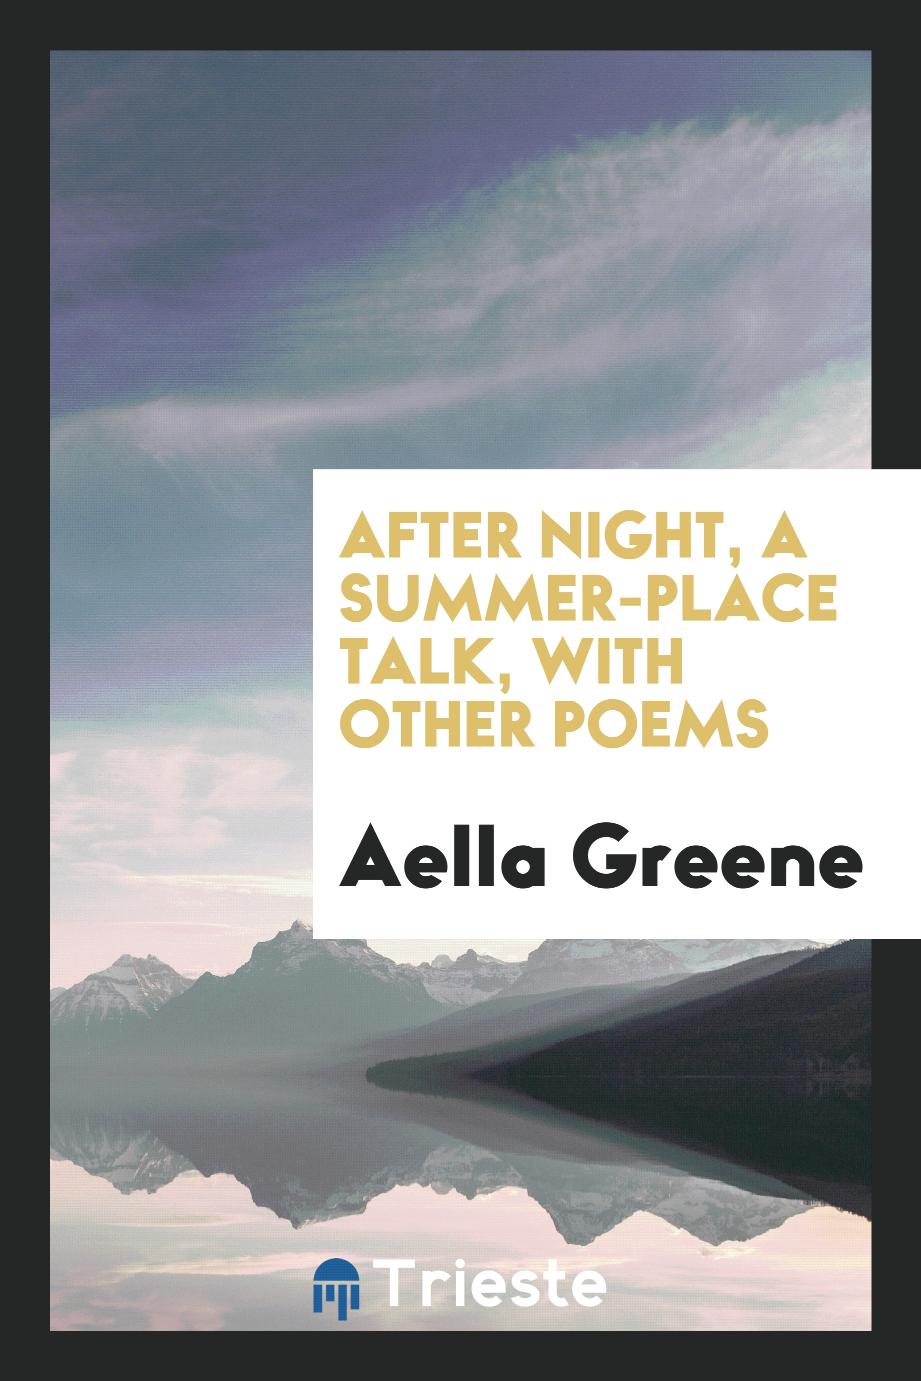 After Night, a Summer-Place Talk, with Other Poems